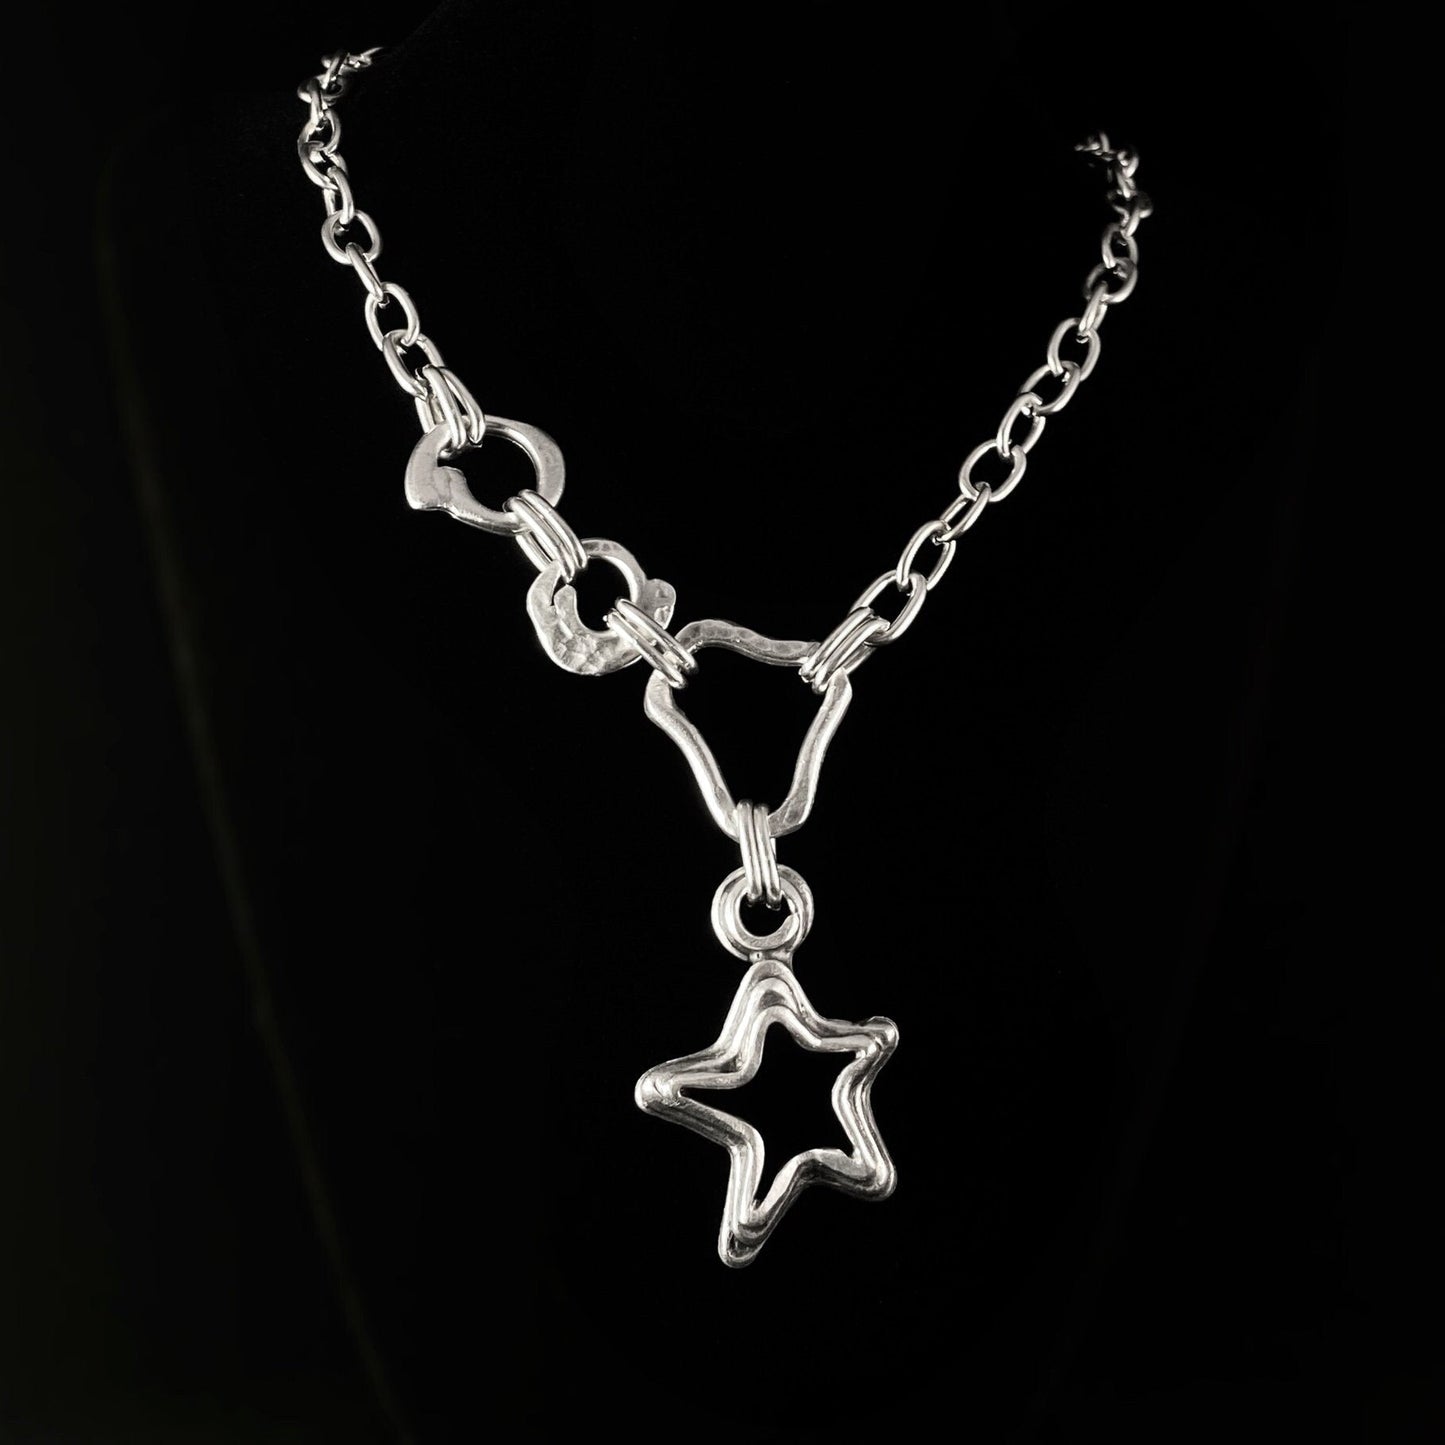 Silver Chain Link AbstractNecklace With Star Pendant, Handmade, Nickel Free-Noir